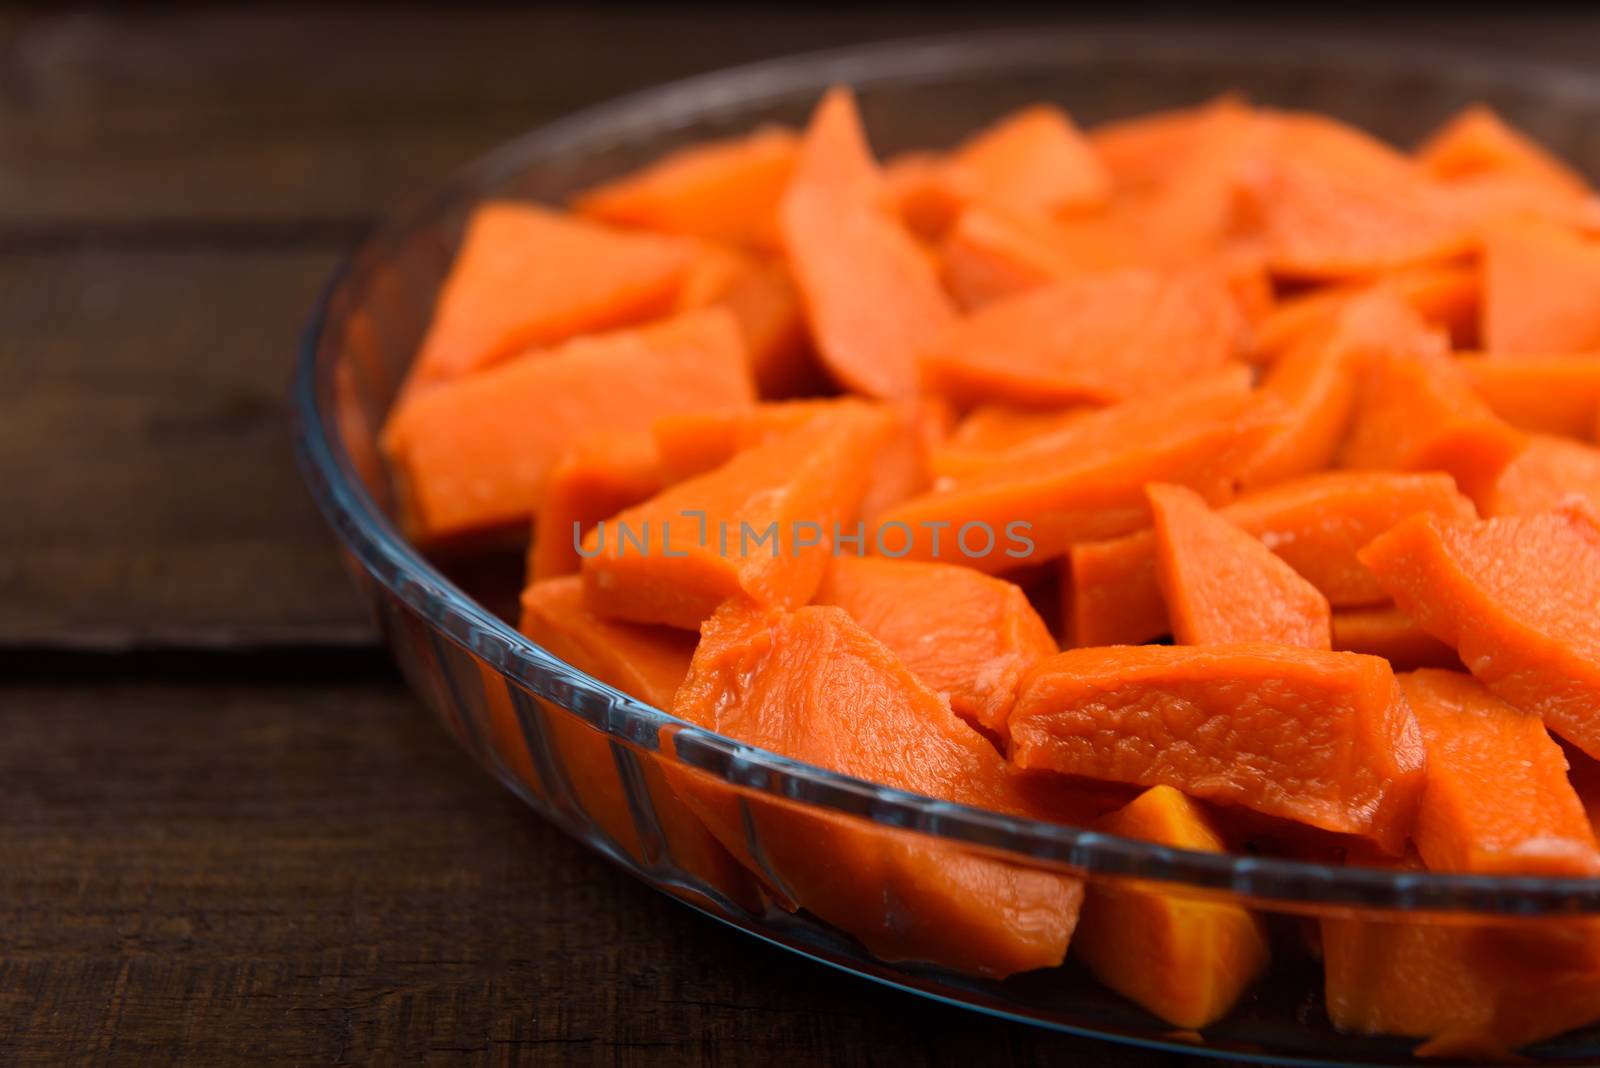 sweet baked pumpkin chopped lomikami in glass dish on wooden background